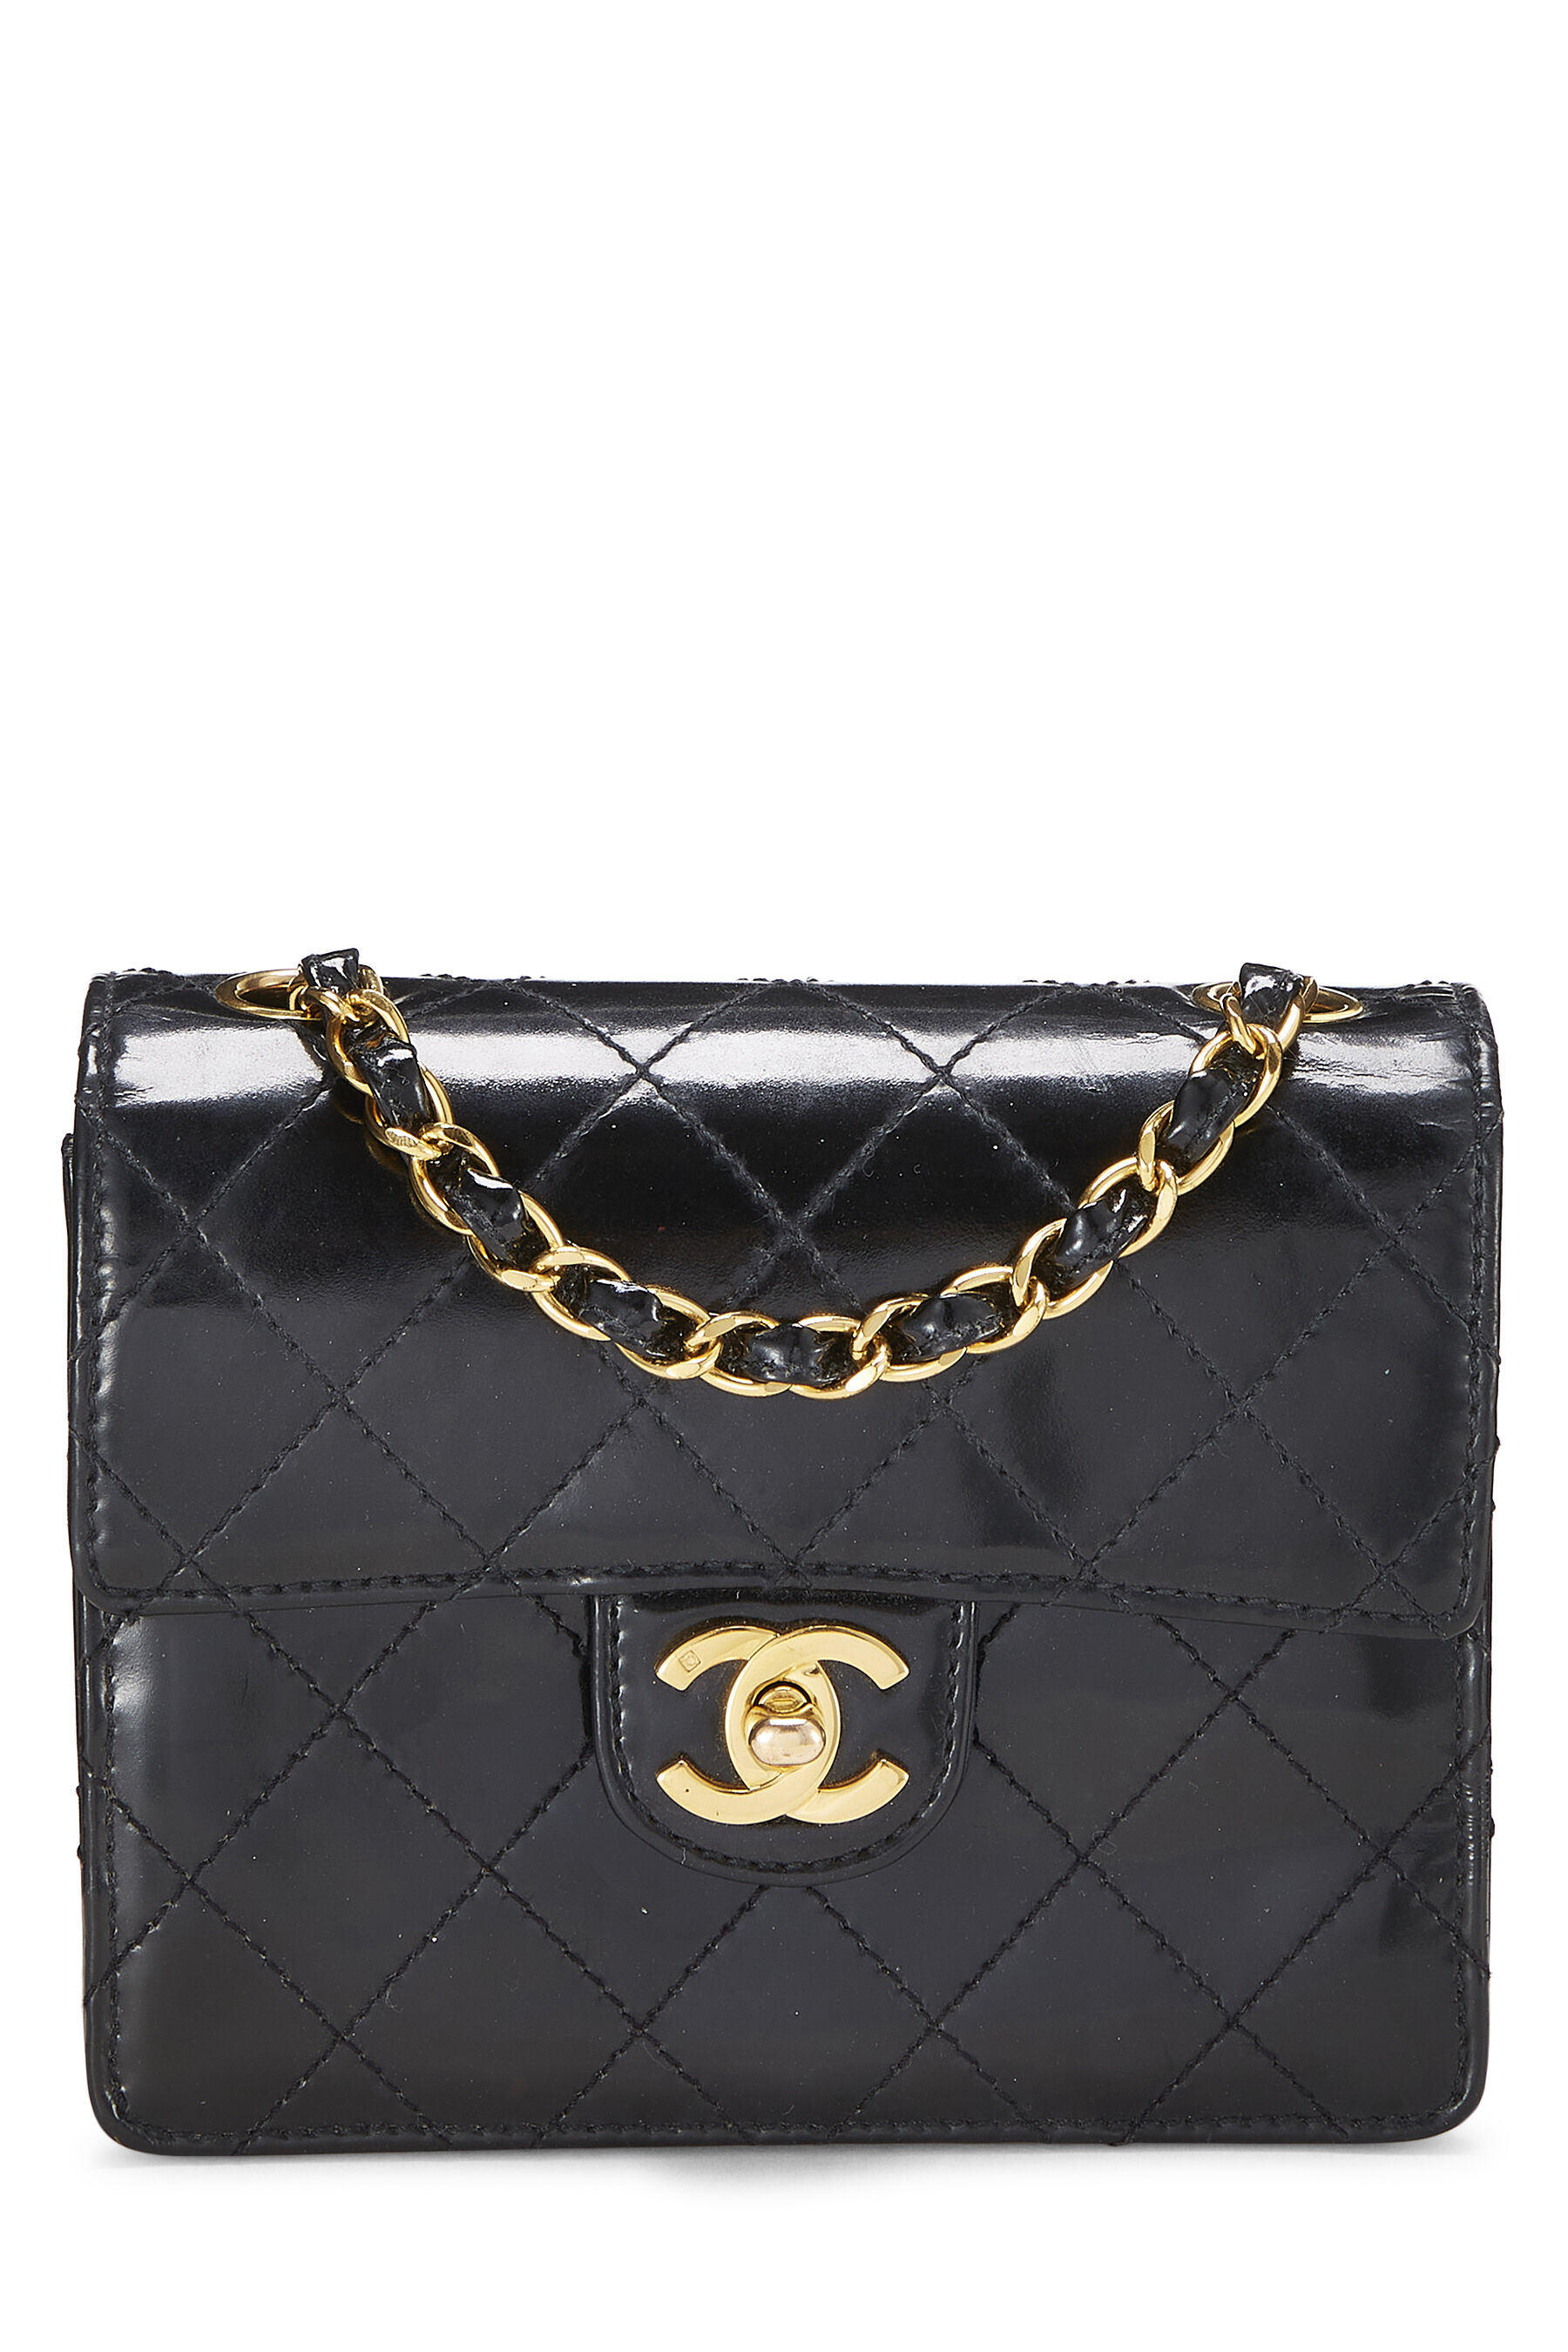 chanel small clutch wallet